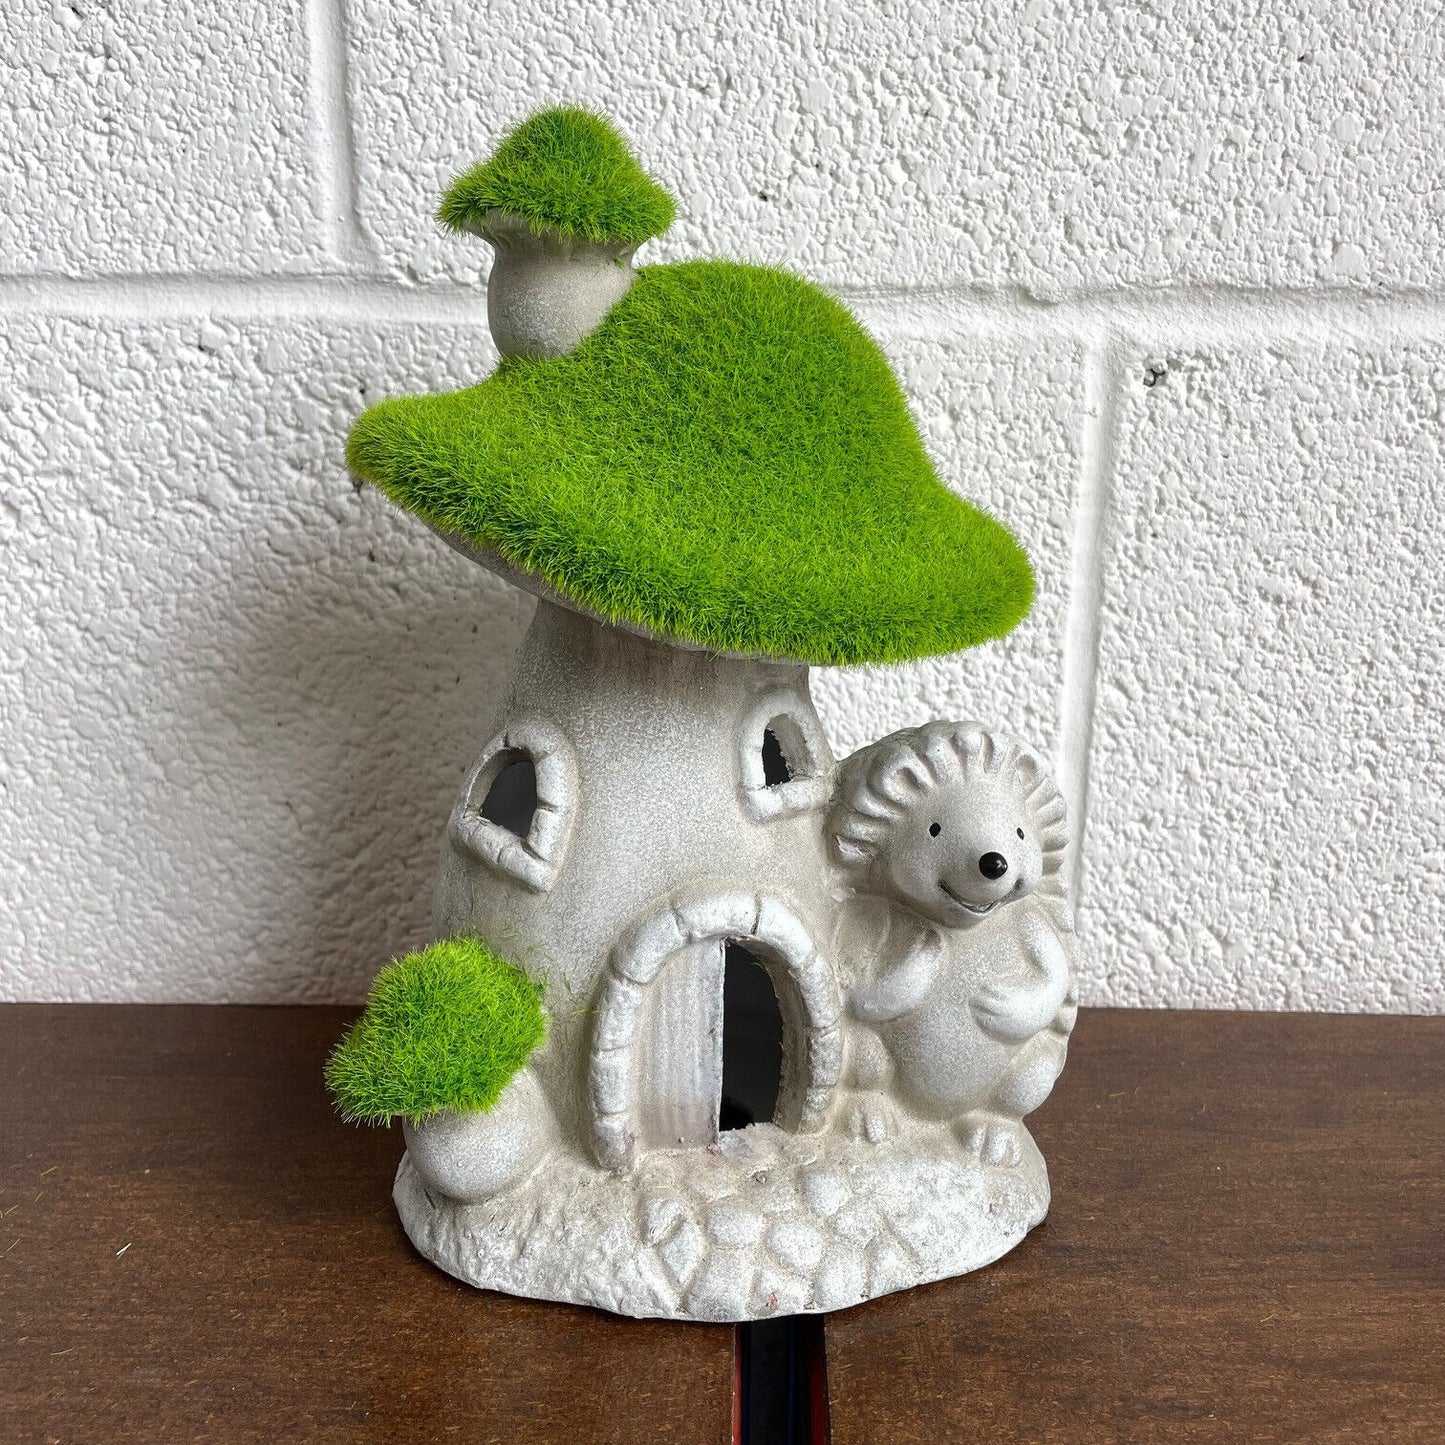 Hedgehog Toadstool House Figure With Grassy Roof